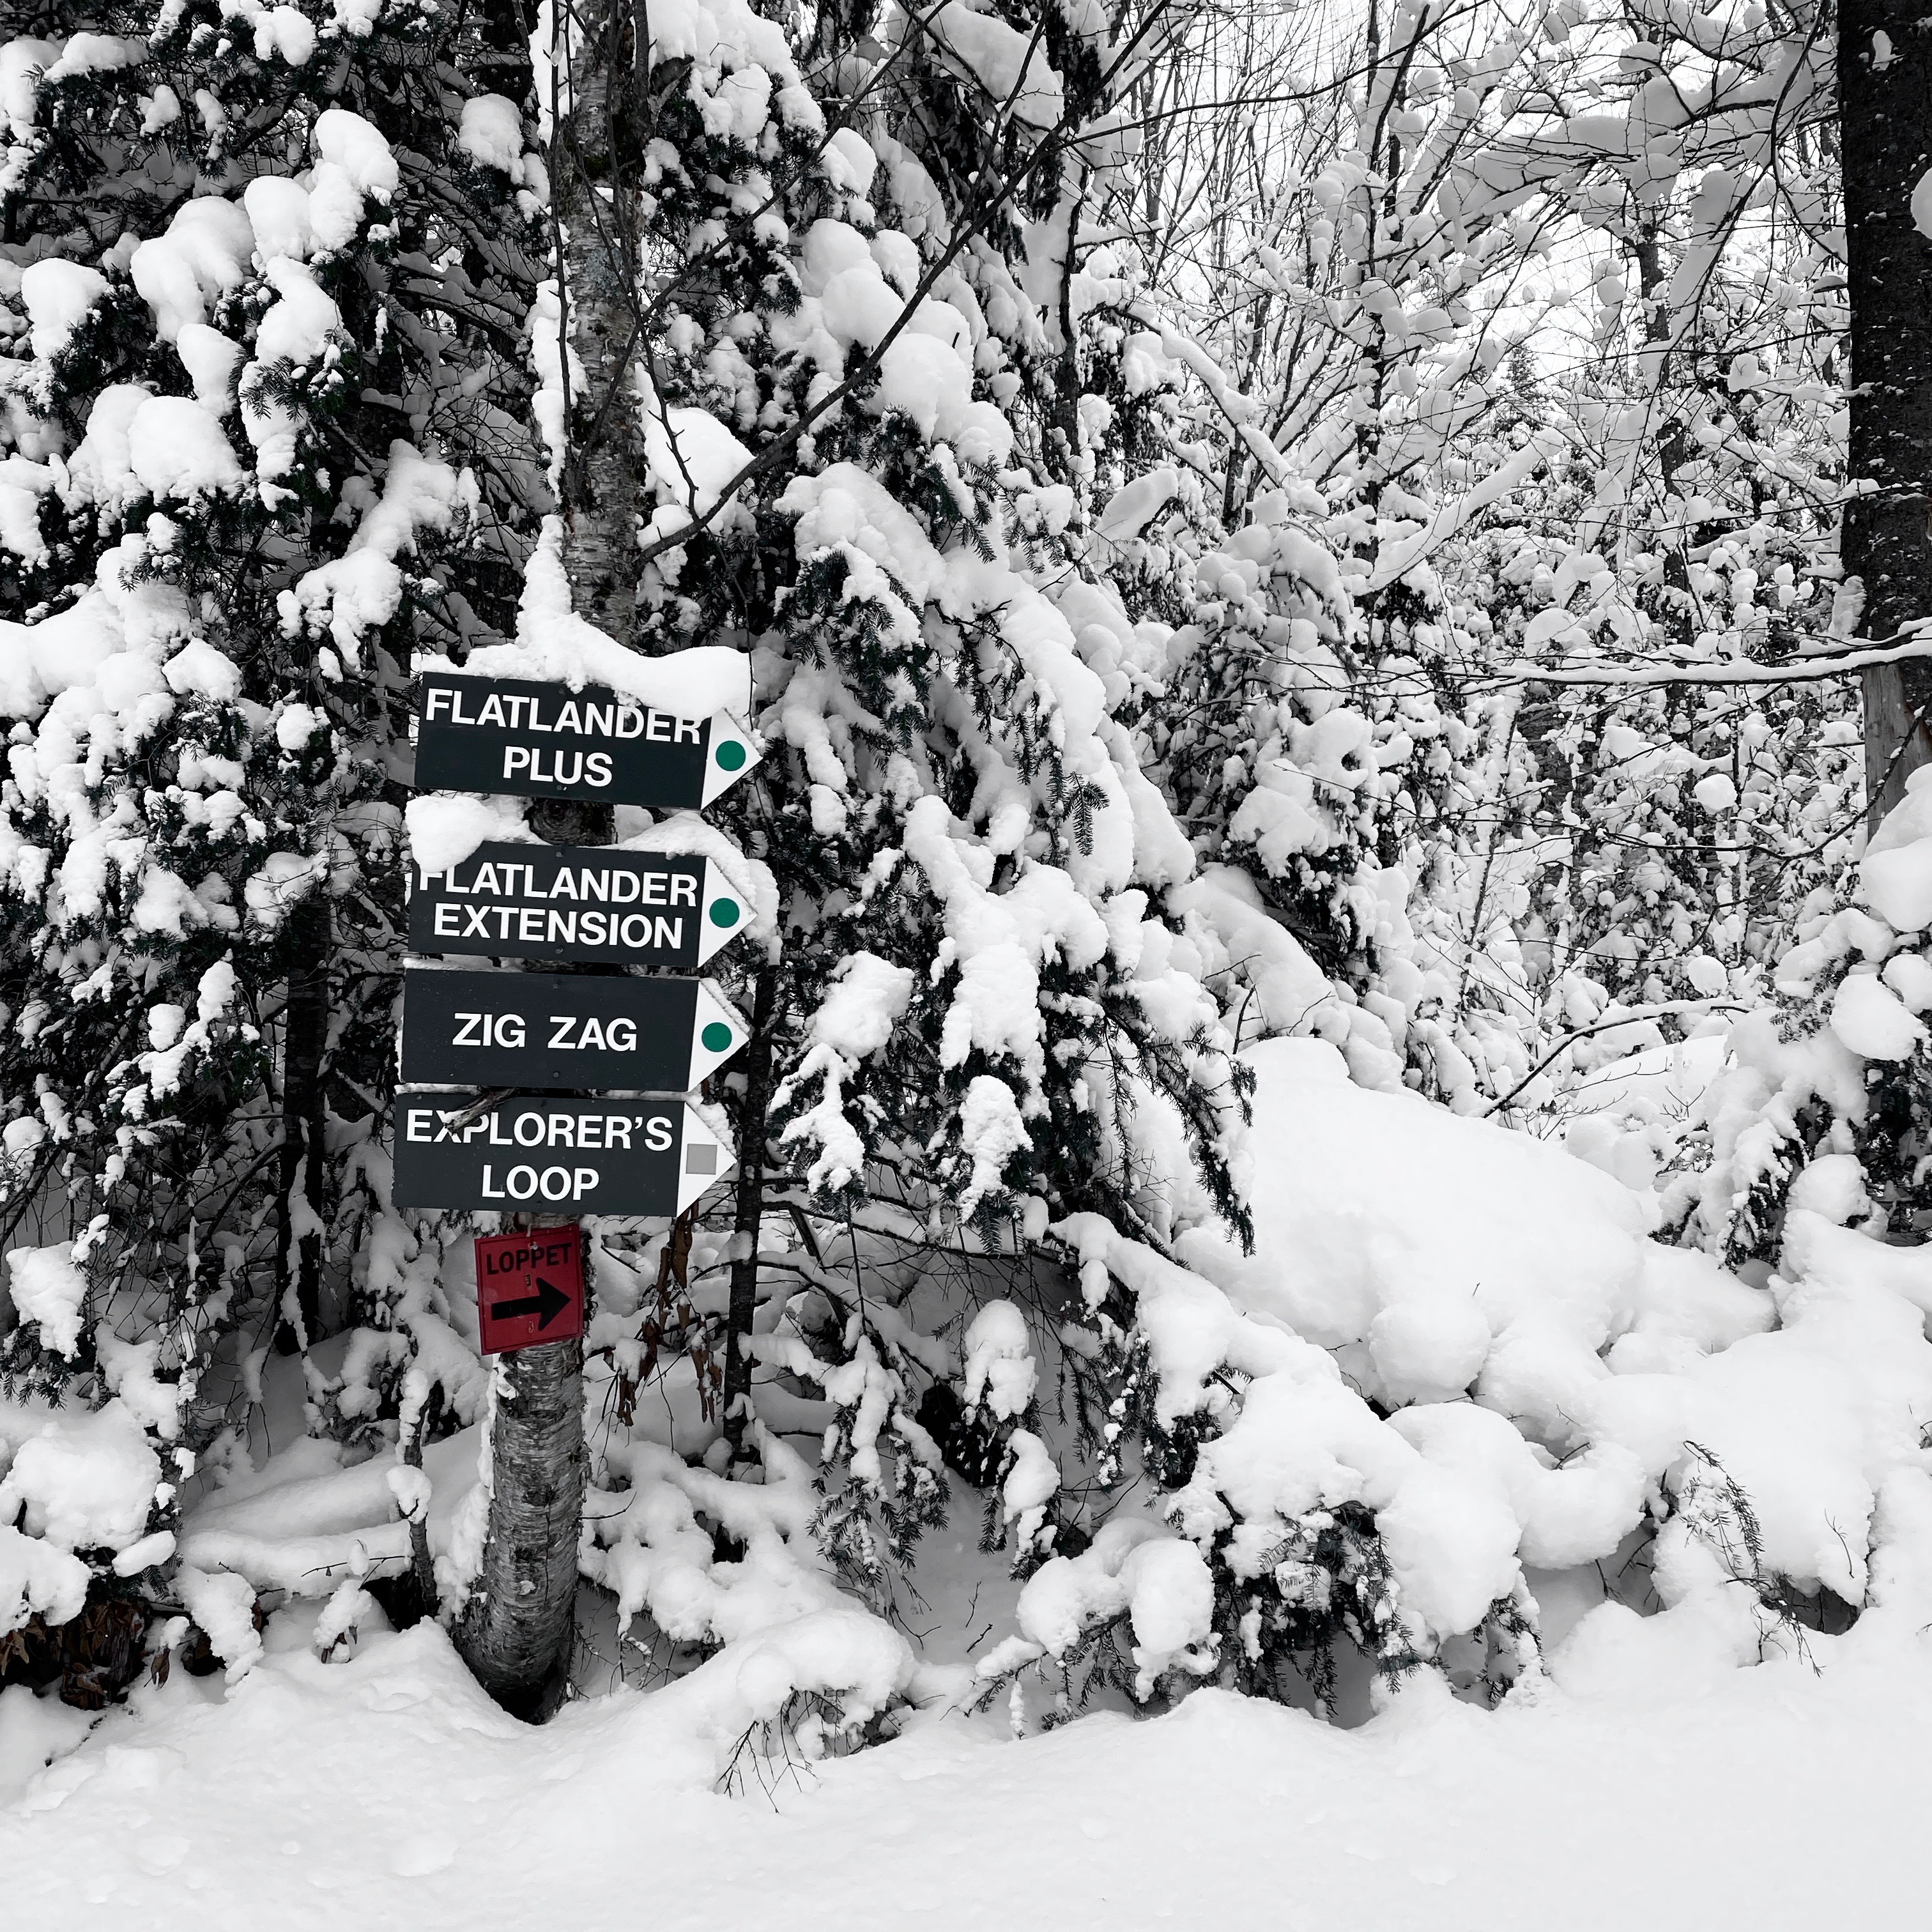 Cross-country ski trail with trail signs.